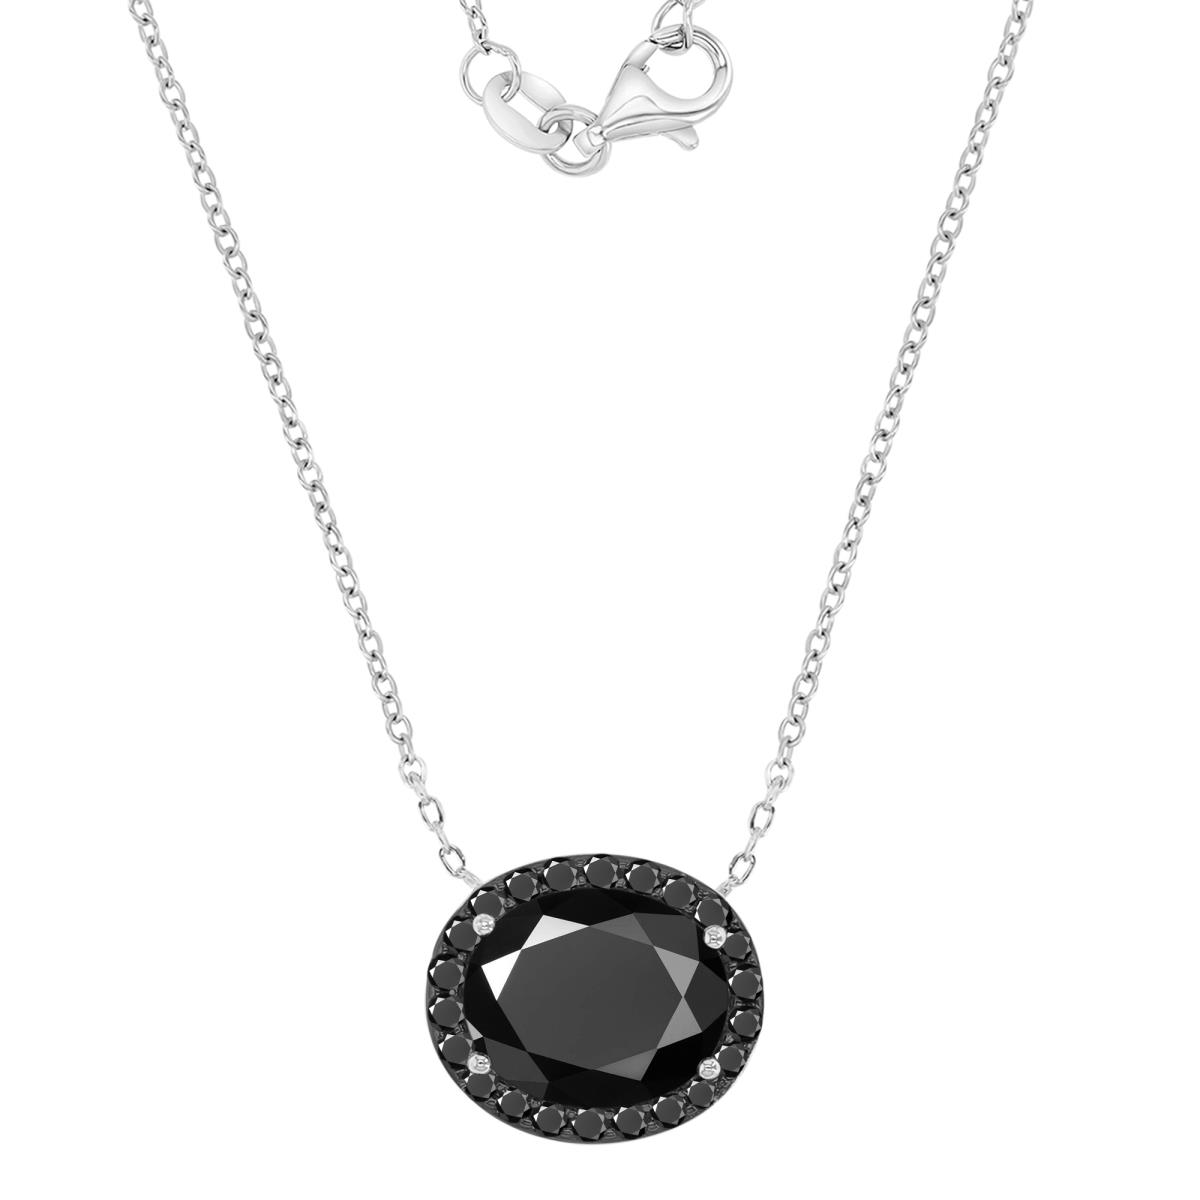 Sterling Silver Black & White 15.6X13.4MM Polished Black Spinel Oval Cut Pendant 18+2" Necklace